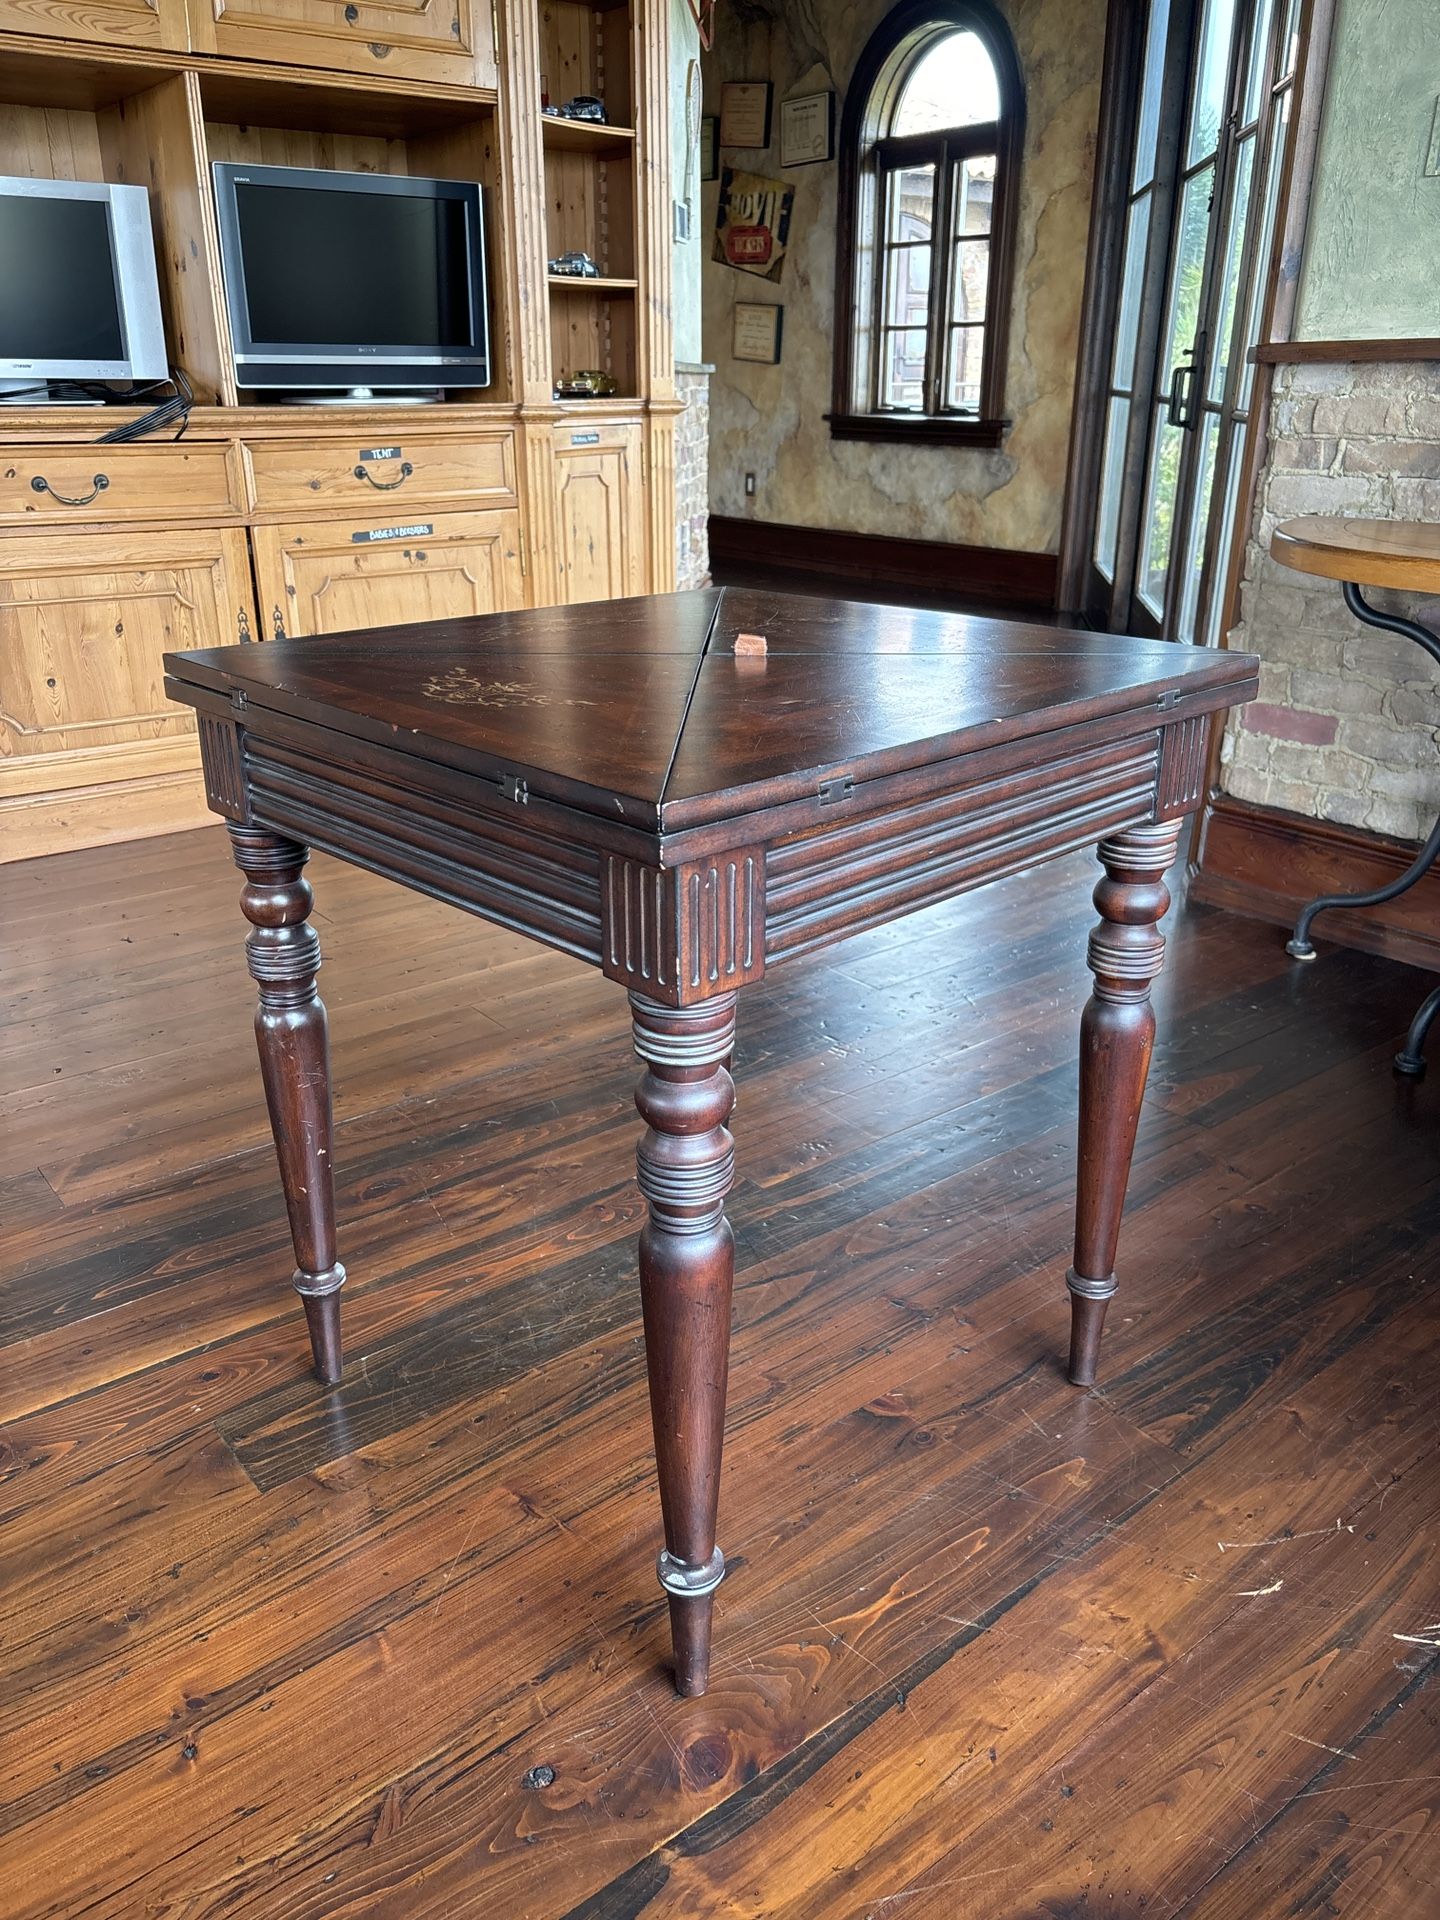 Expandable Game Table! Beautiful Wood Finish with Antique Look!